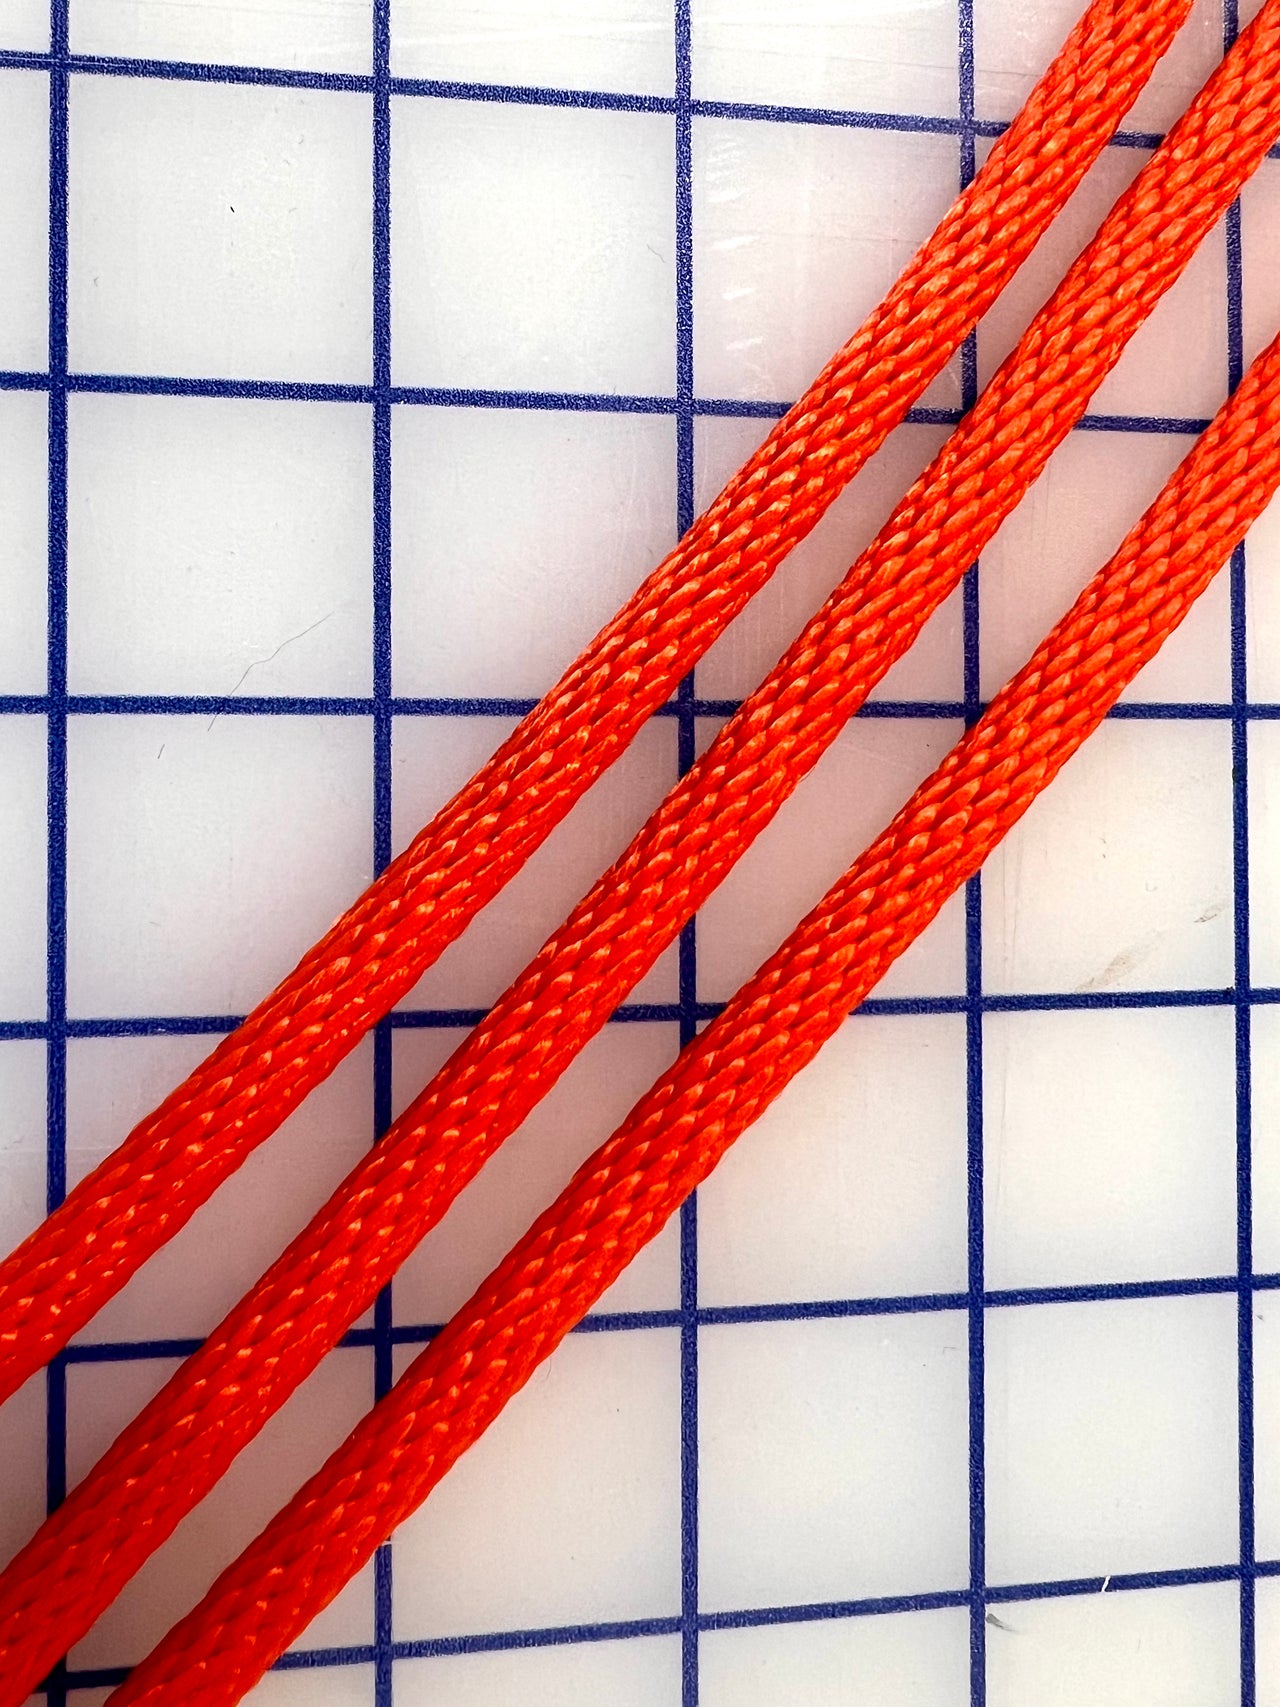 1/4-inch Solid-braid Floating Rope